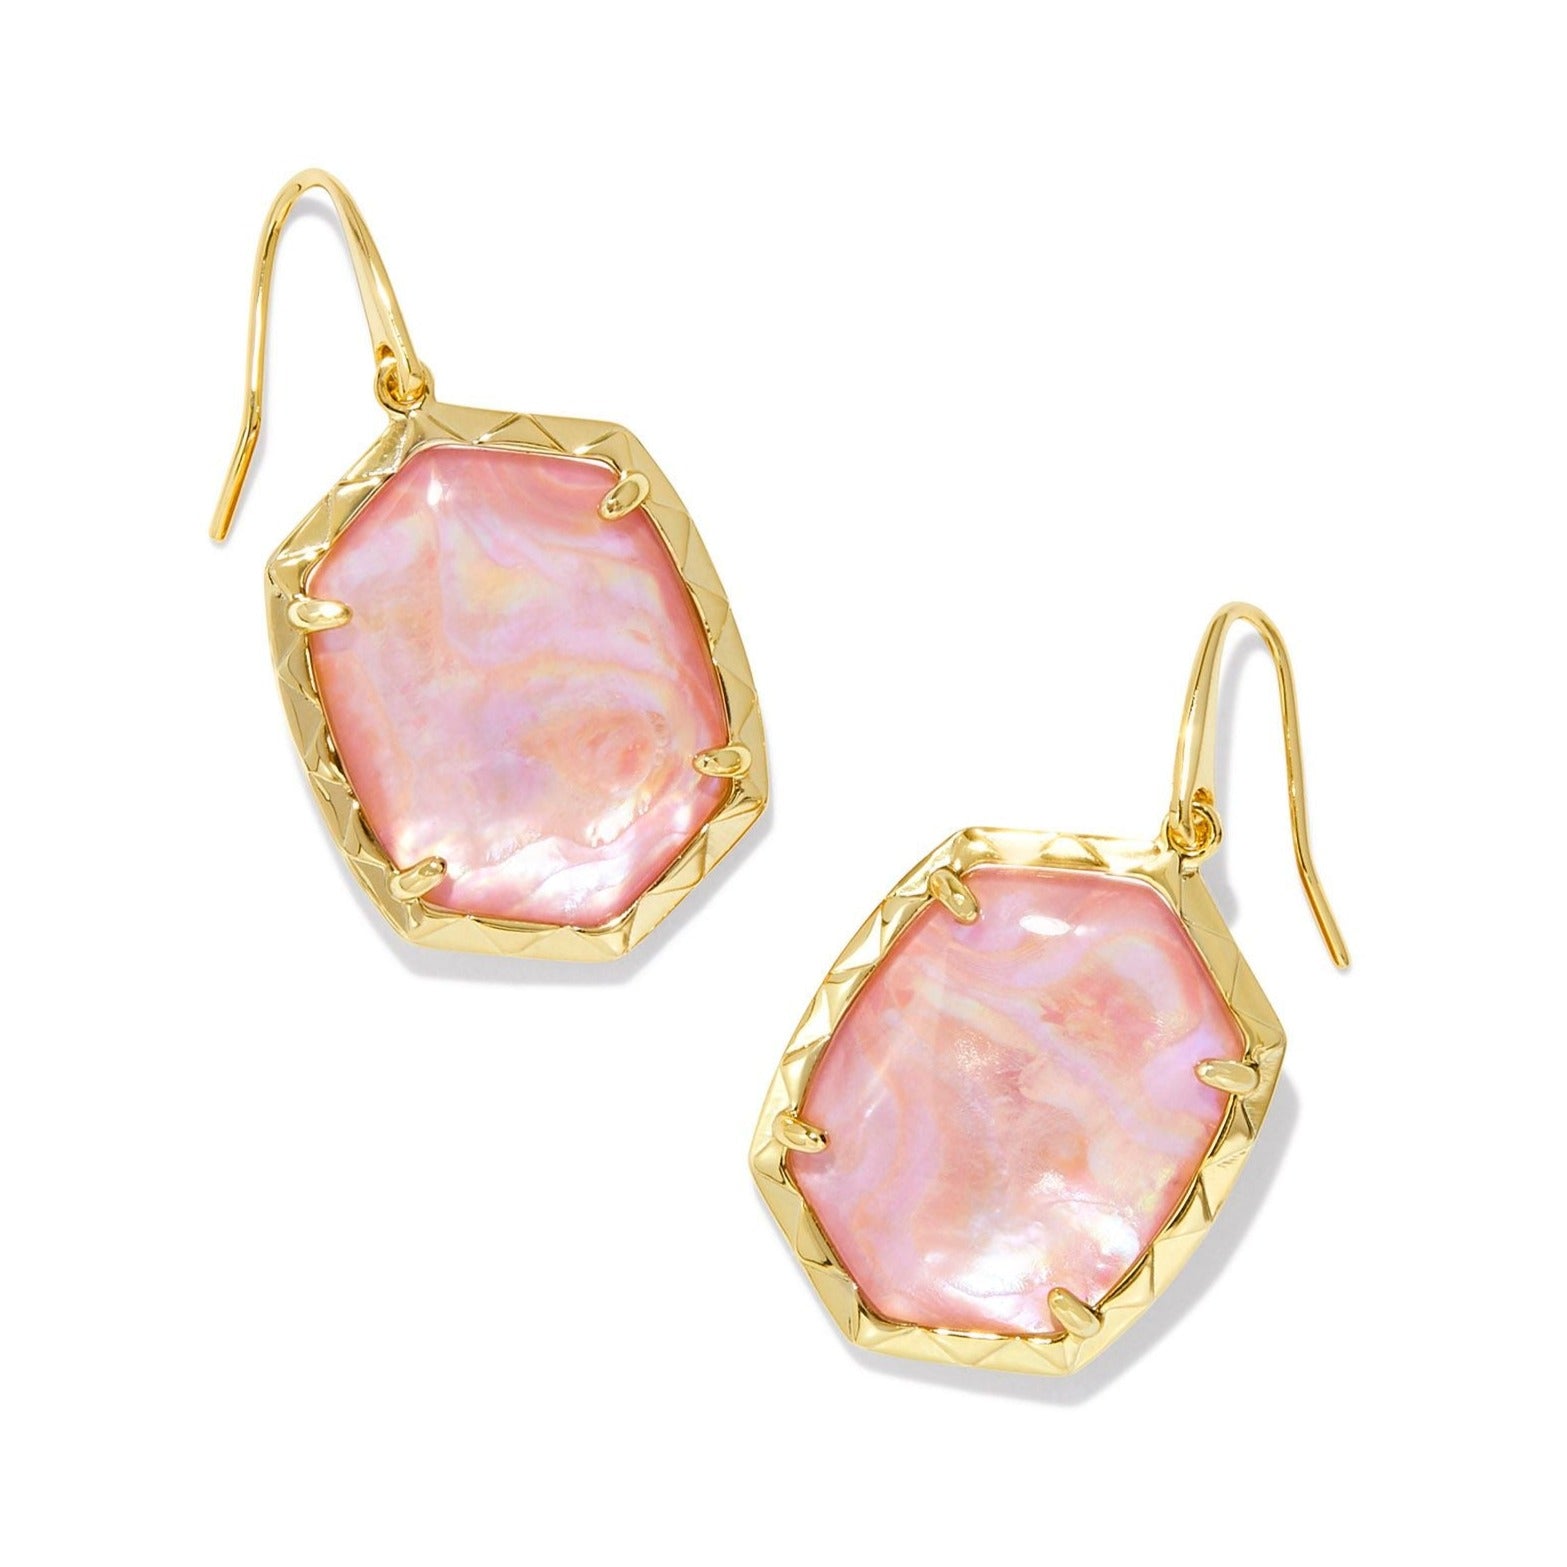 Kendra Scott | Daphne Gold Drop Earrings in Light Pink Iridescent Abalone - Giddy Up Glamour Boutique